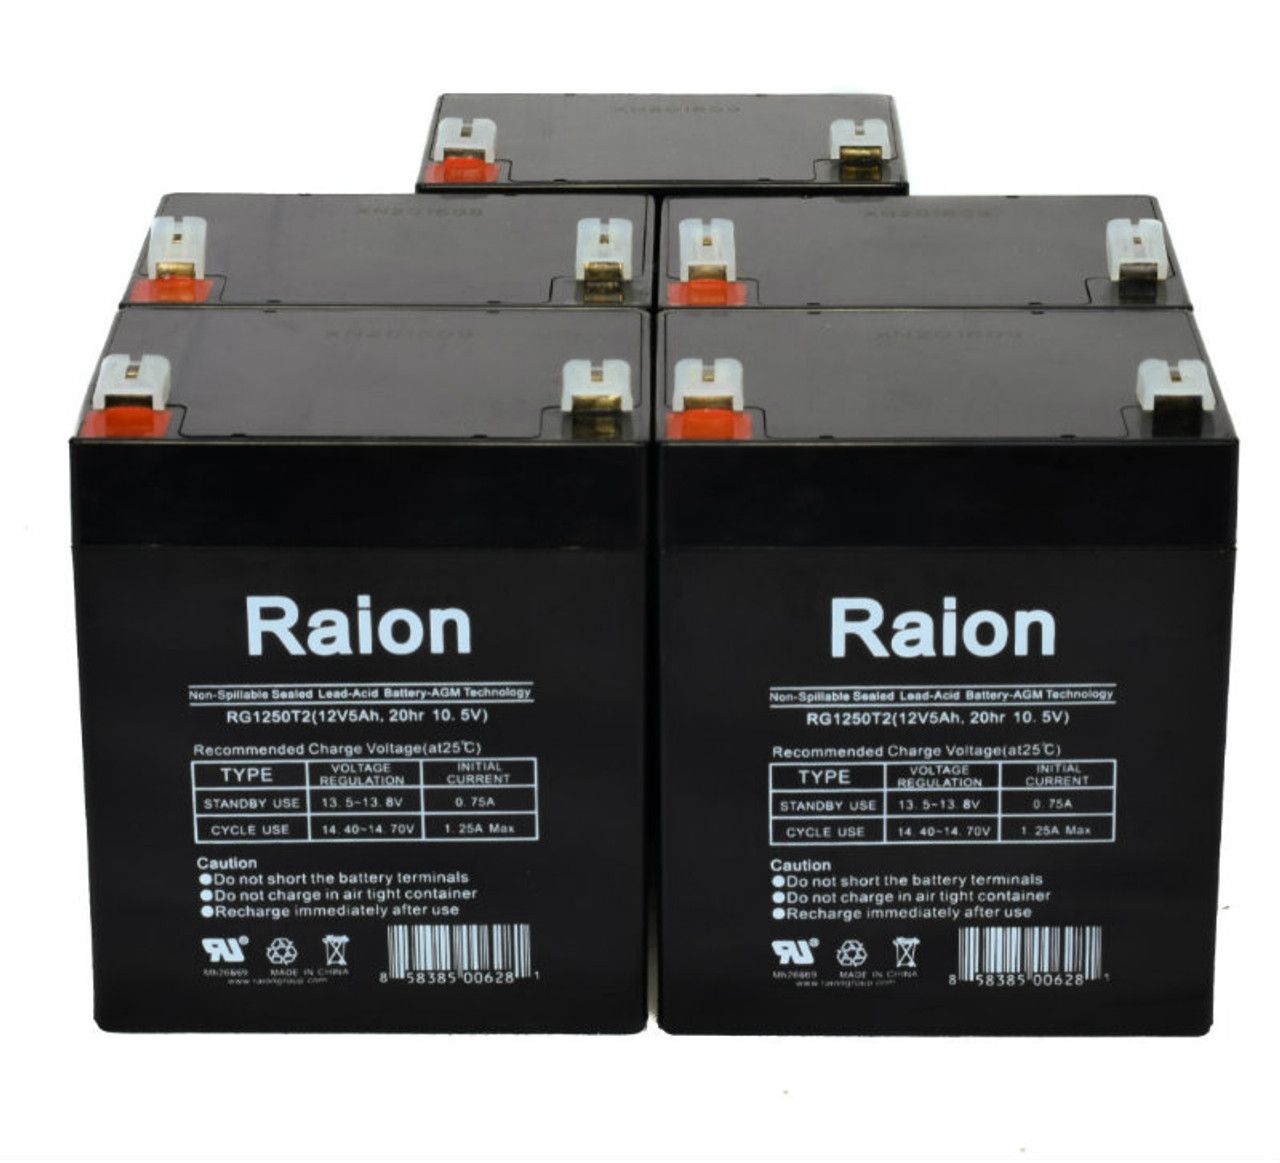 Raion Power RG1250T1 Replacement Battery for Valen Topin 12 TP 5 F1 - (5 Pack)